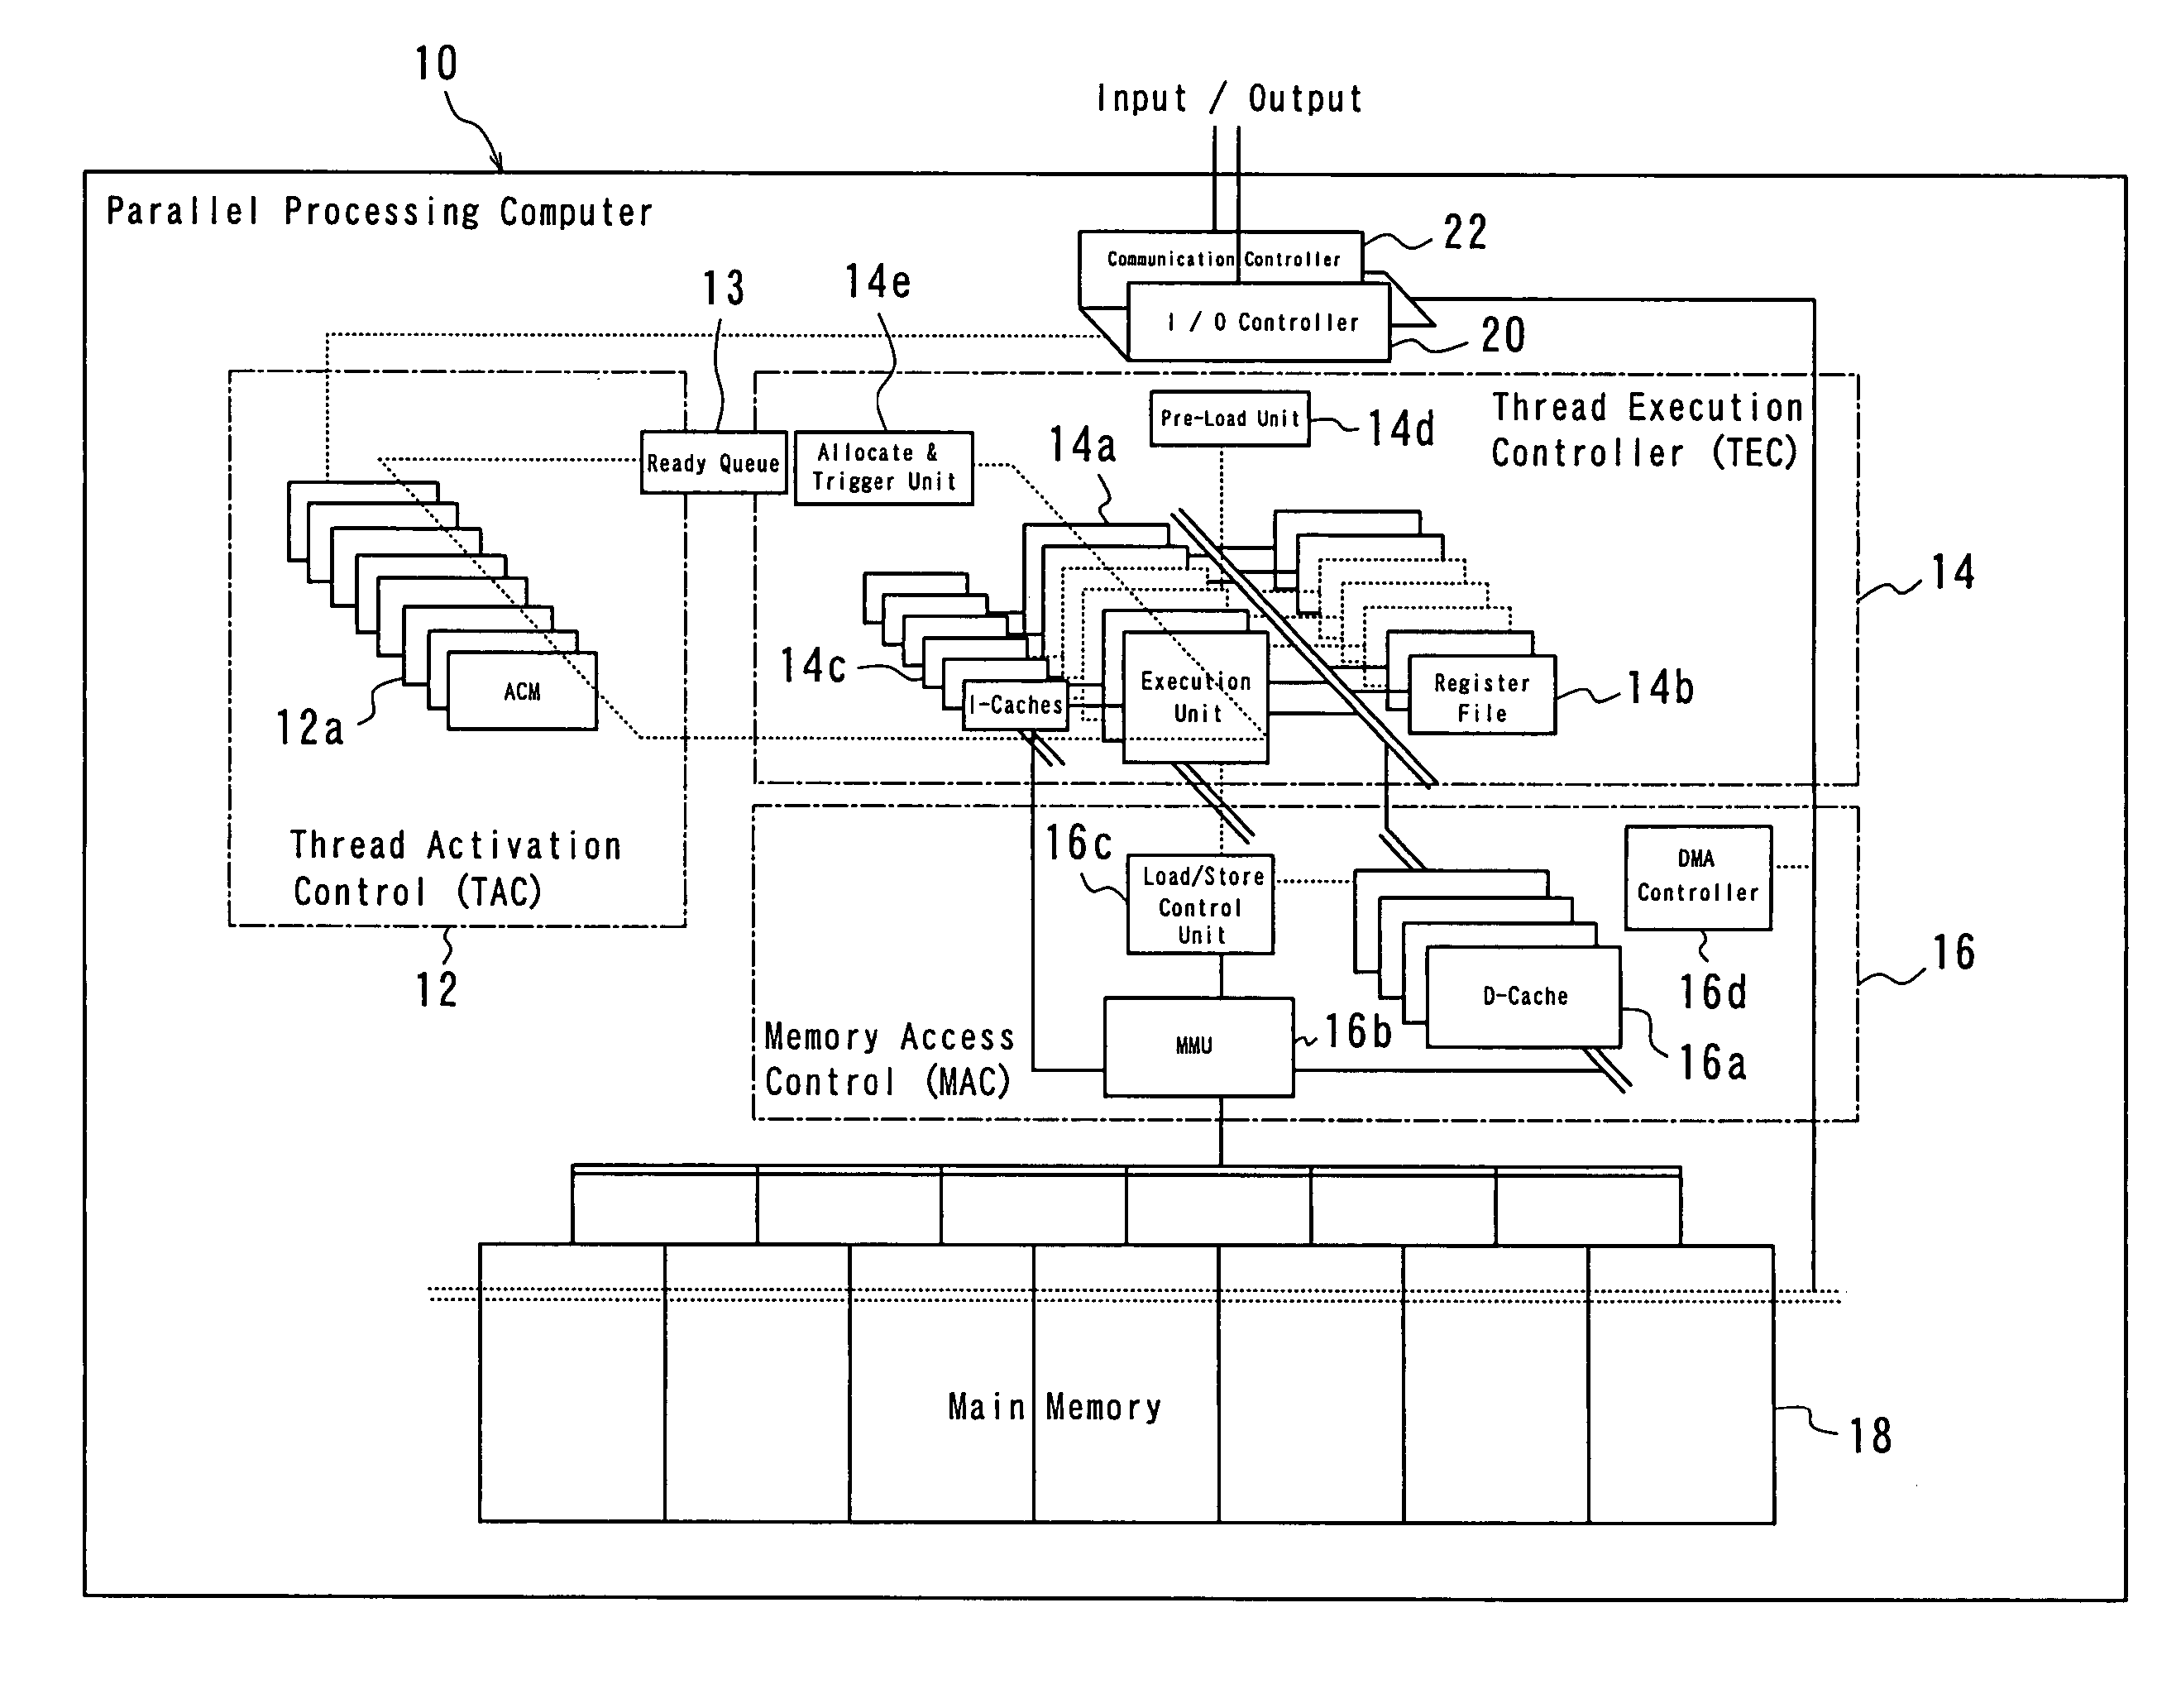 Parallel processing computer